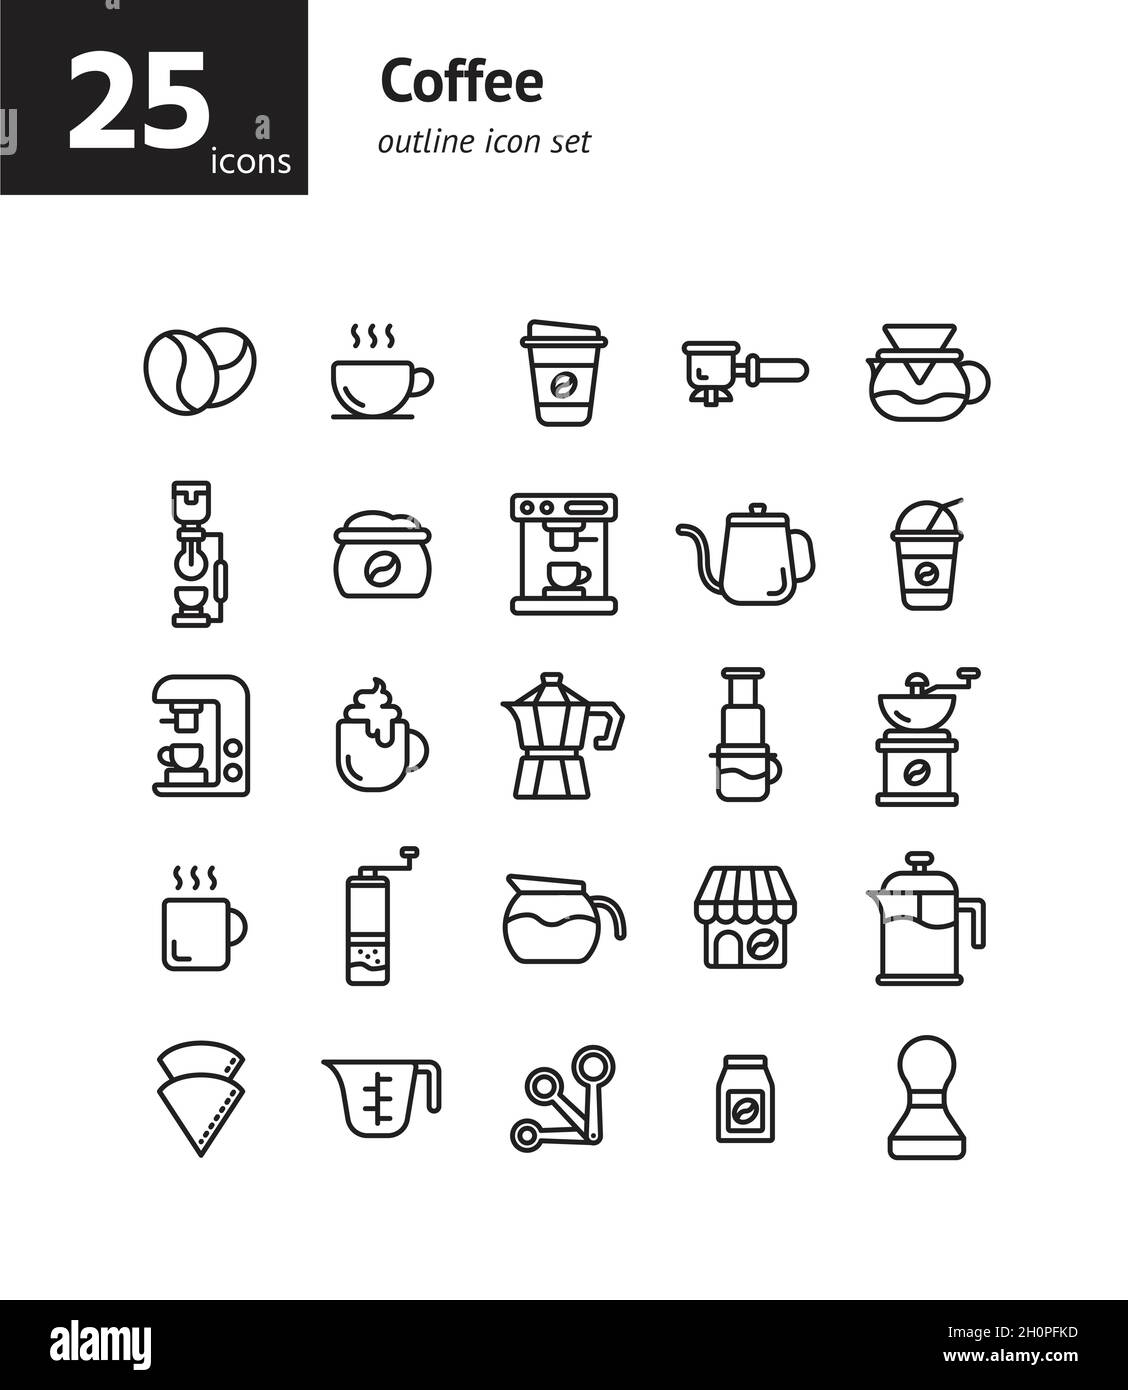 Coffee outline icon set. Vector and Illustration. Stock Vector